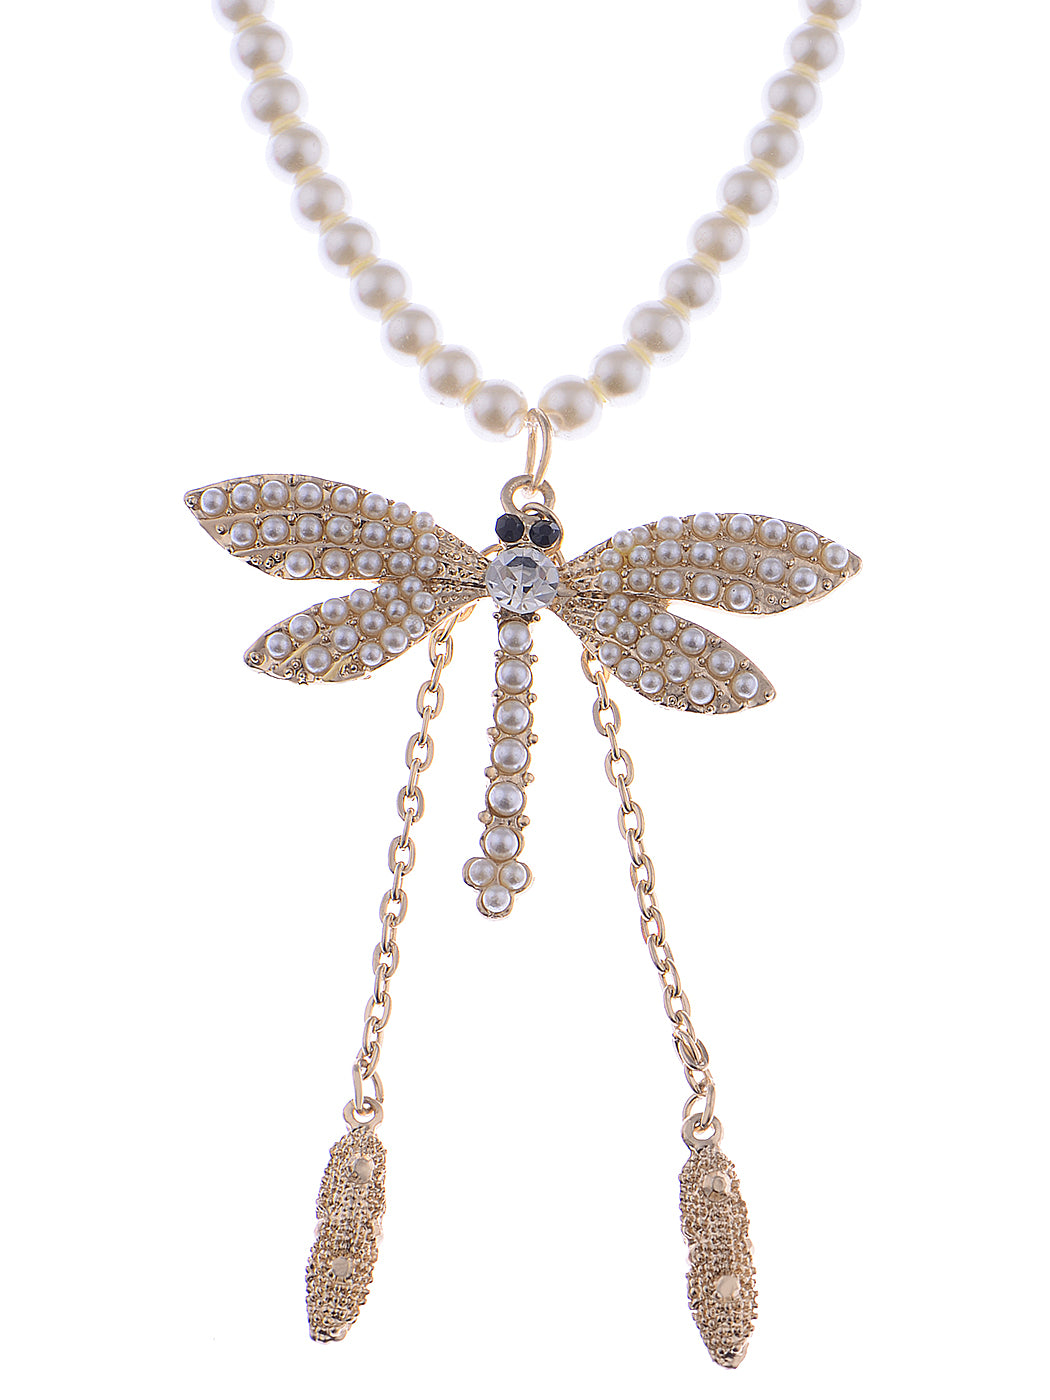 Dragonfly Pendant Necklace Pearl Bead Strand Flying Dangle Pods